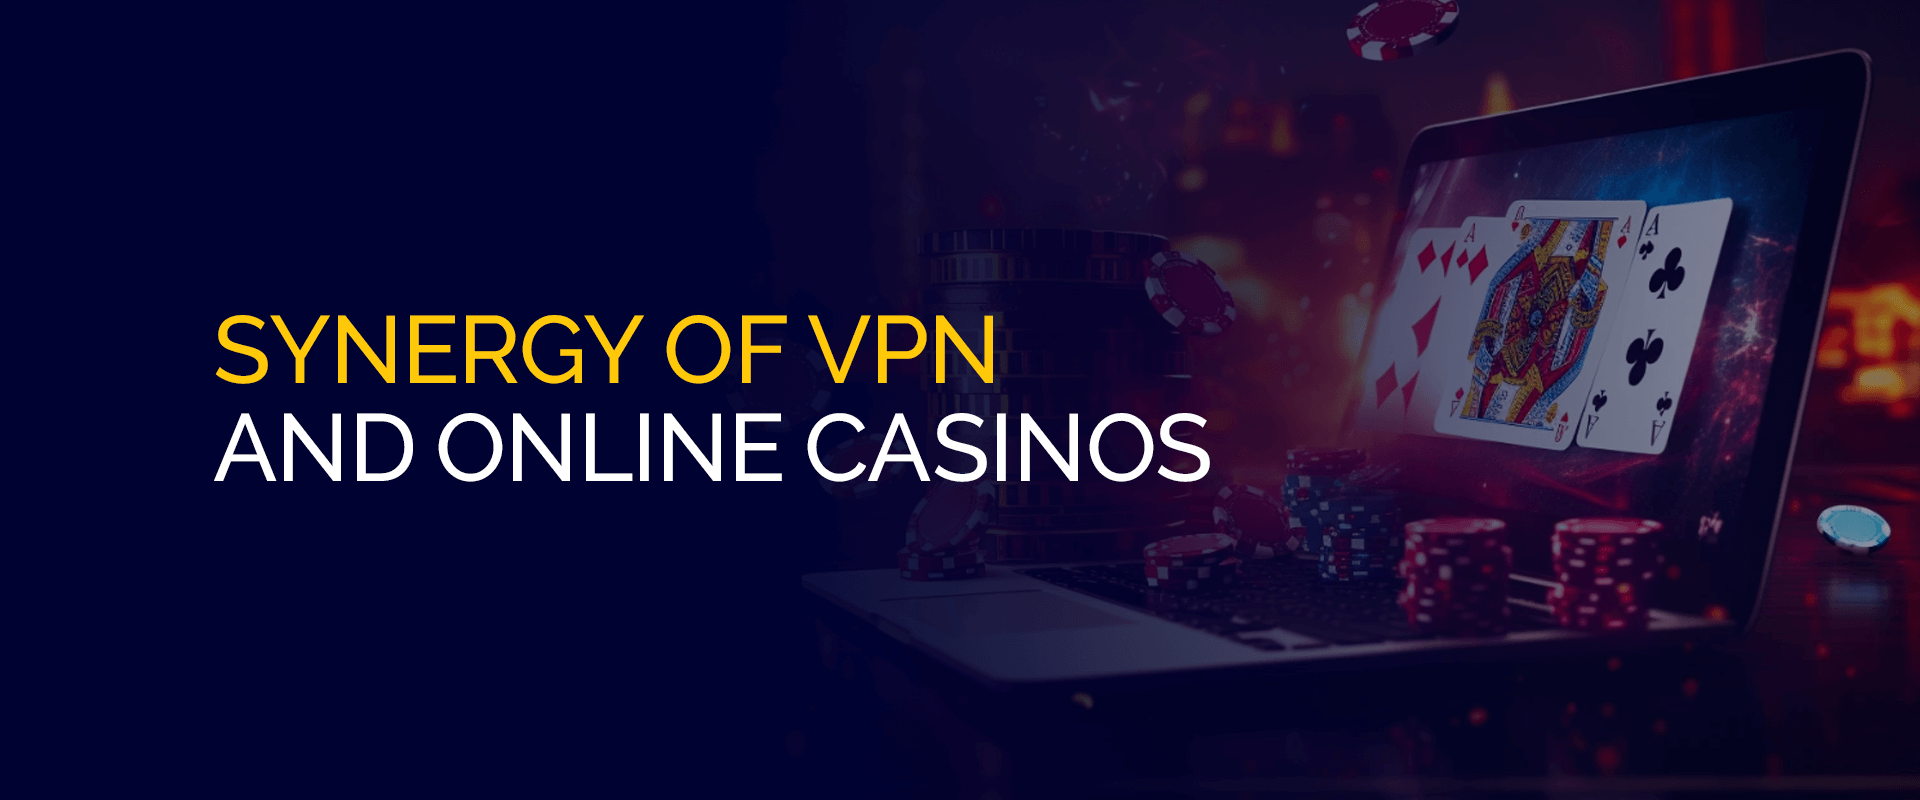 Synergy of VPN and Online Casinos